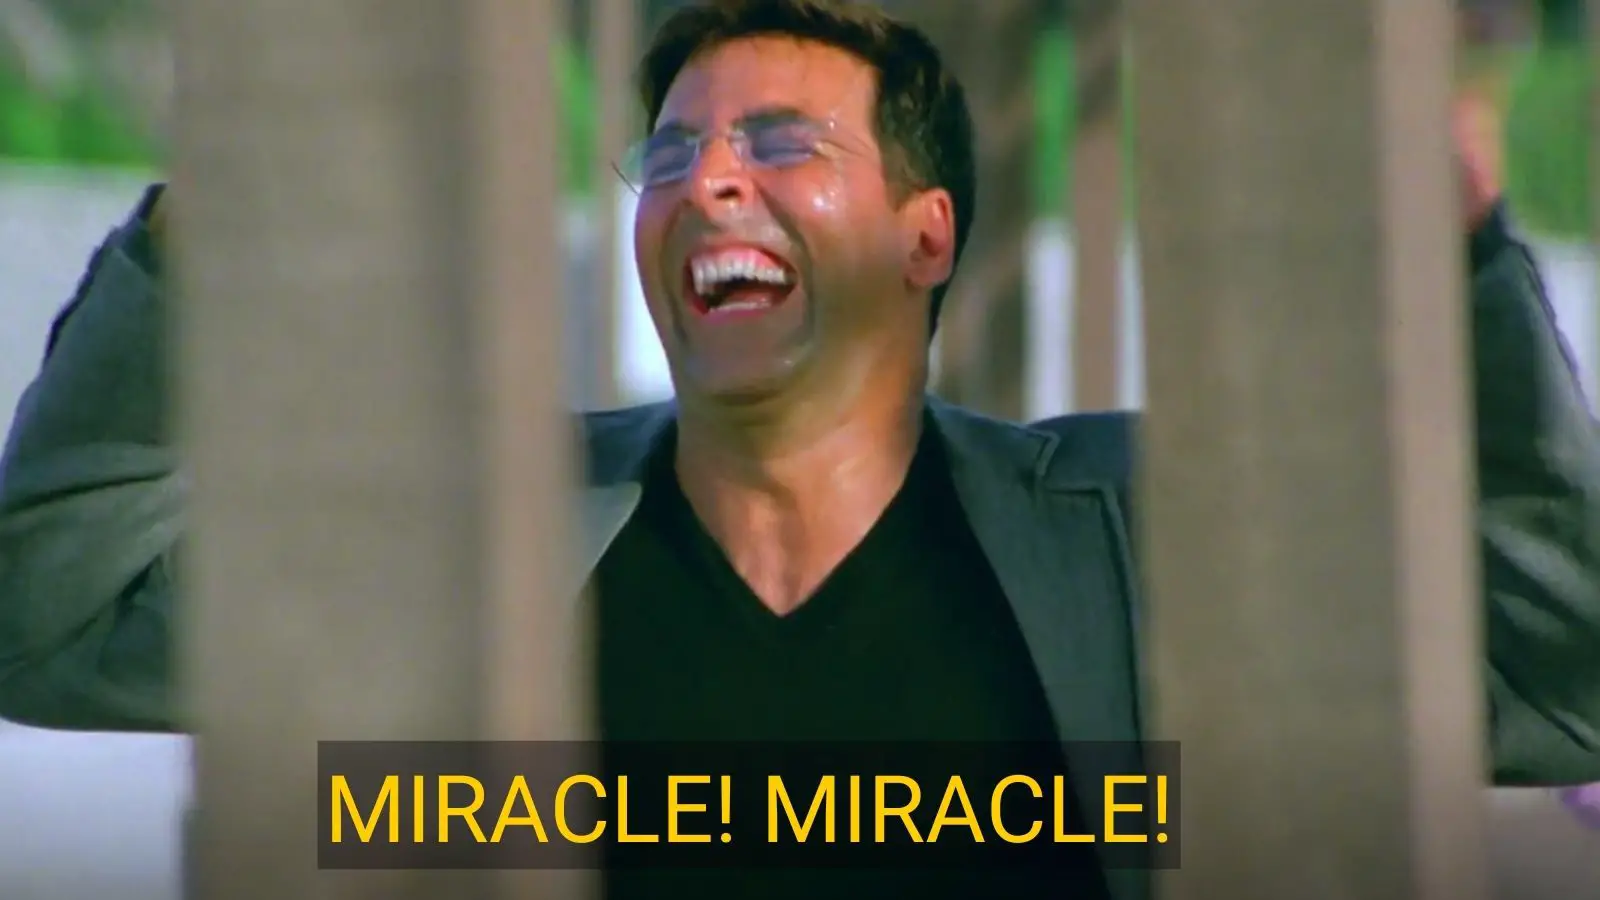 Miracle Miracle meme template of welcome movie